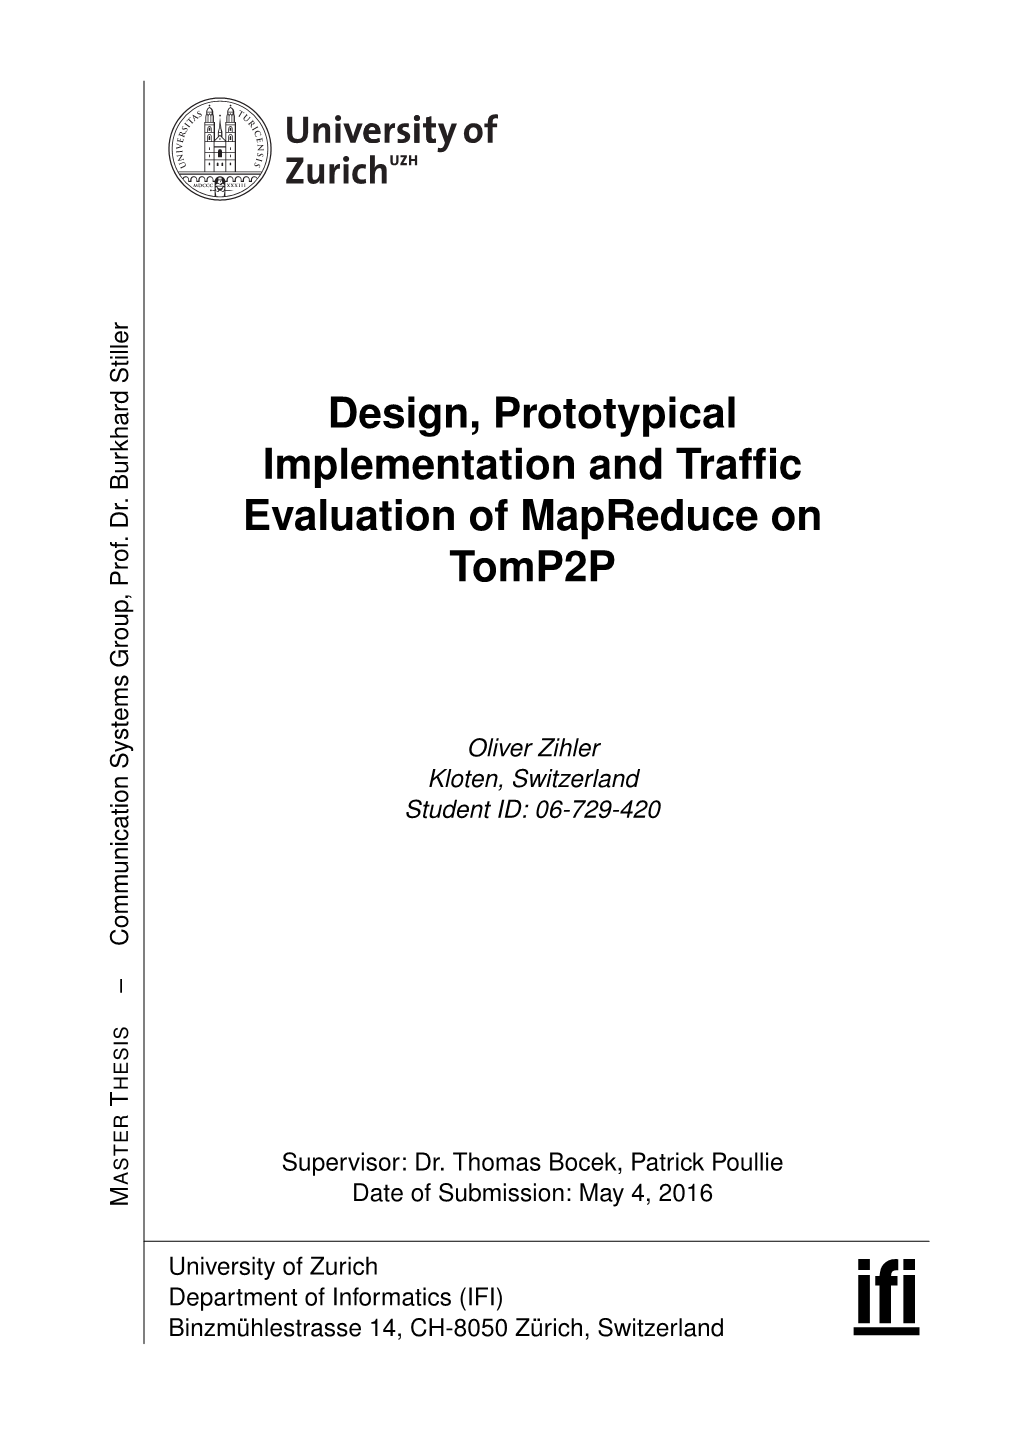 Design, Prototypical Implementation and Traffic Evaluation Of